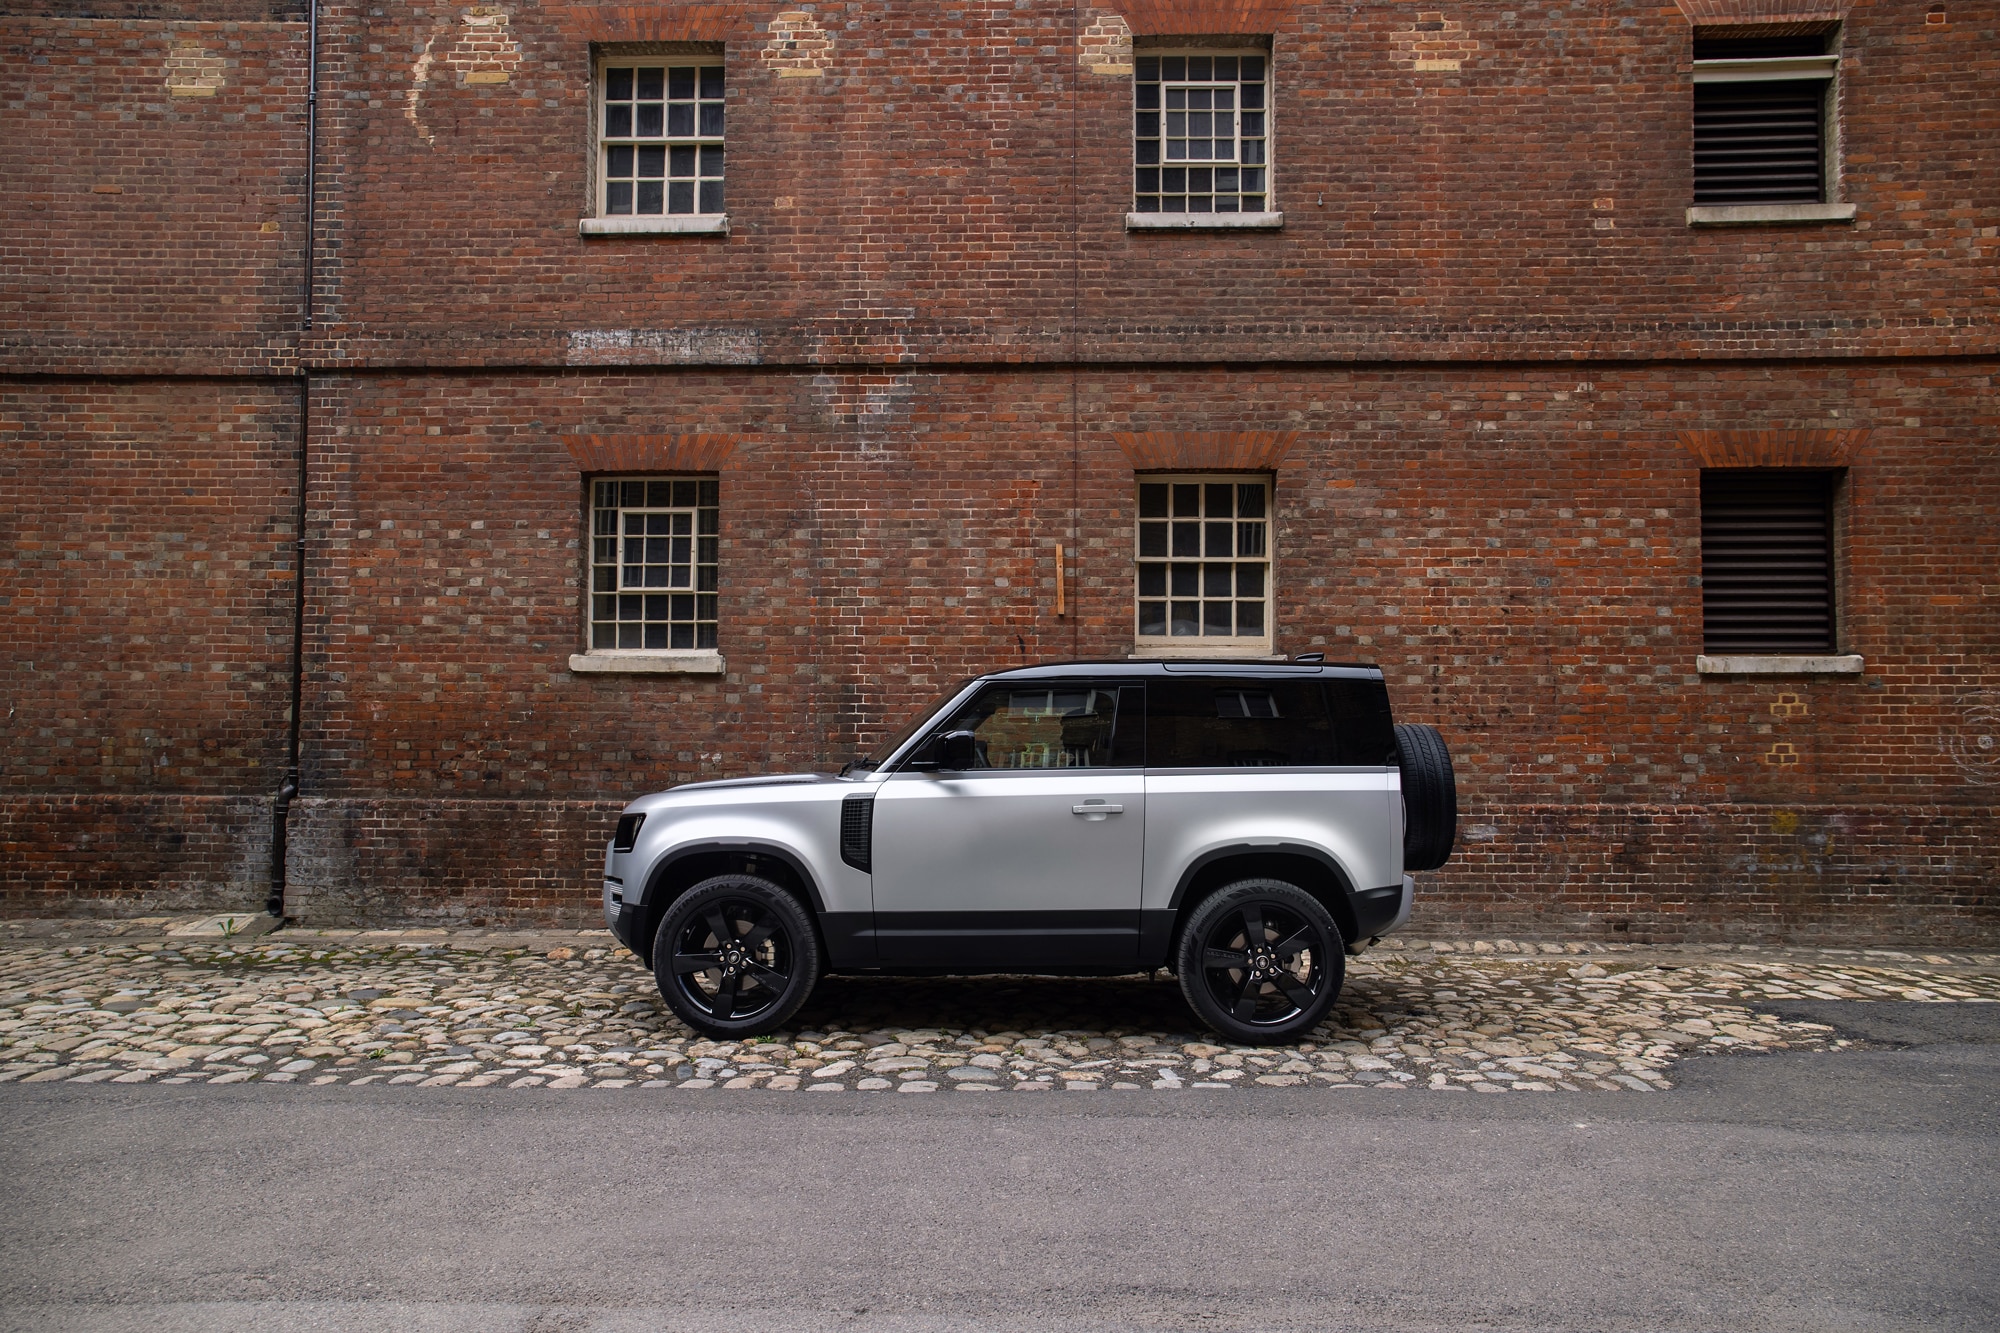 Gray 2021 Land Rover Defender parked outside brick building